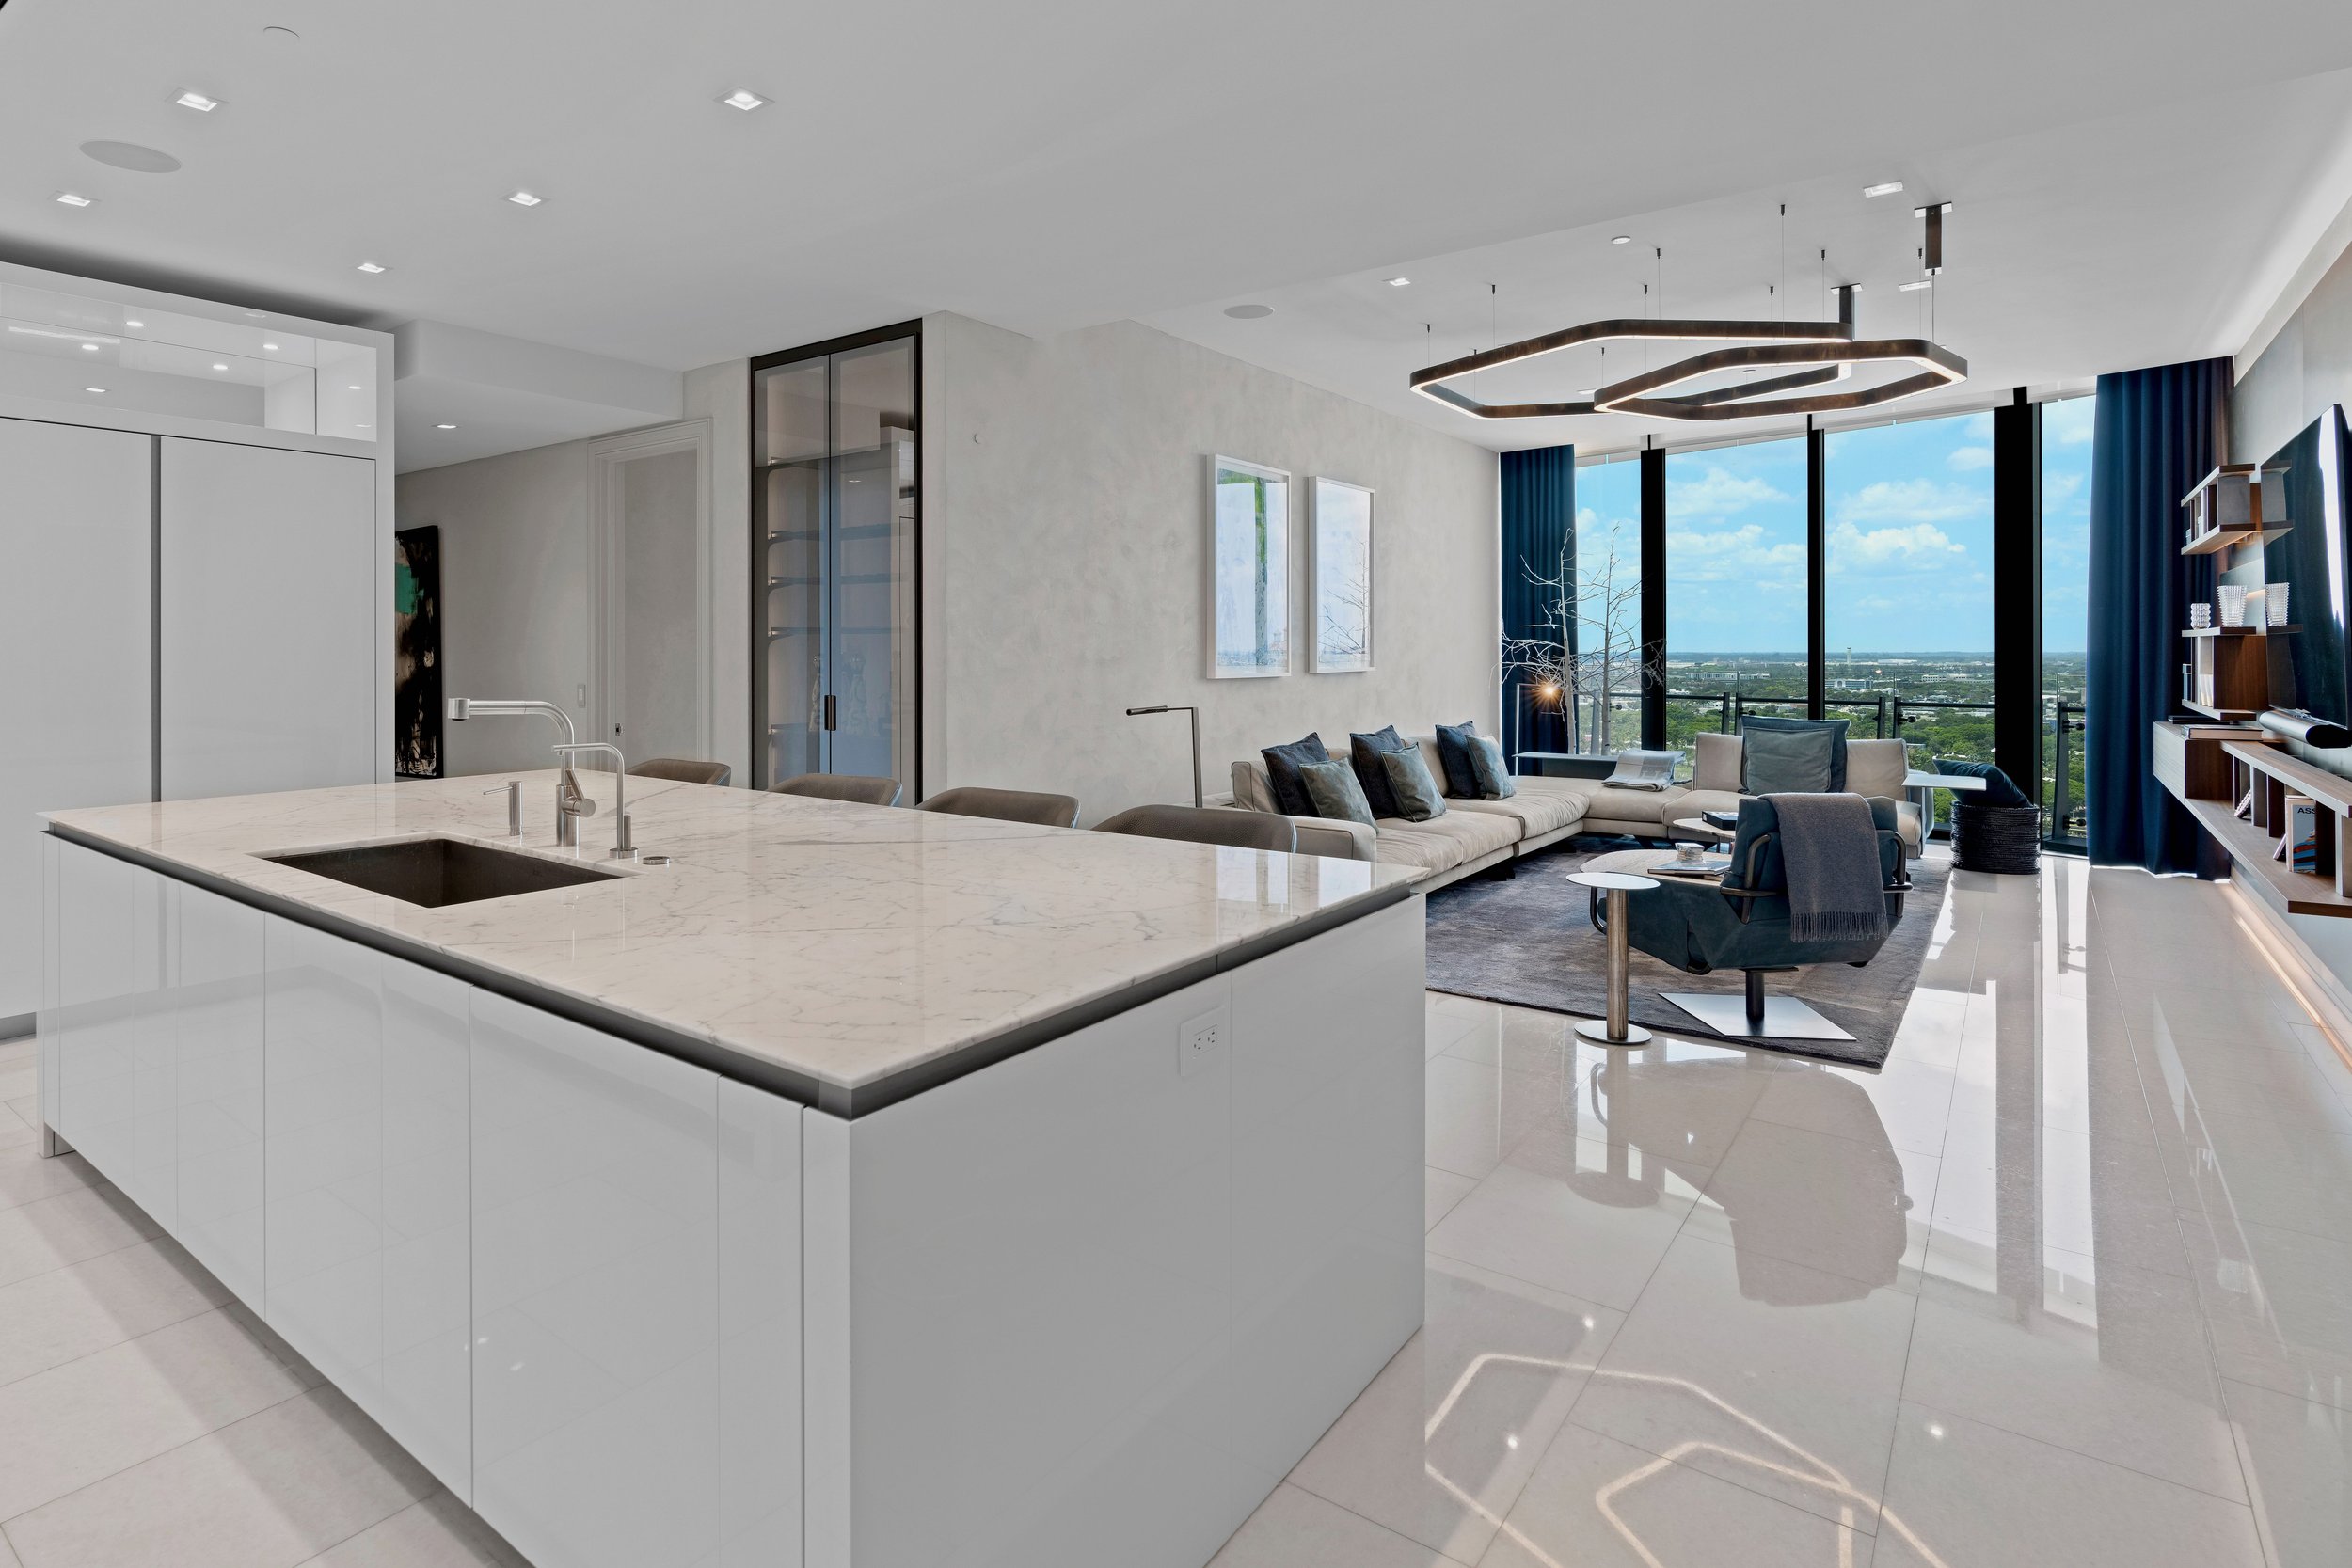 Step Inside An Ultra-Luxe Condo At The Bristol In West Palm Beach Asking $23.9 Million, Over $4,600 Per Square Foot 13.jpg